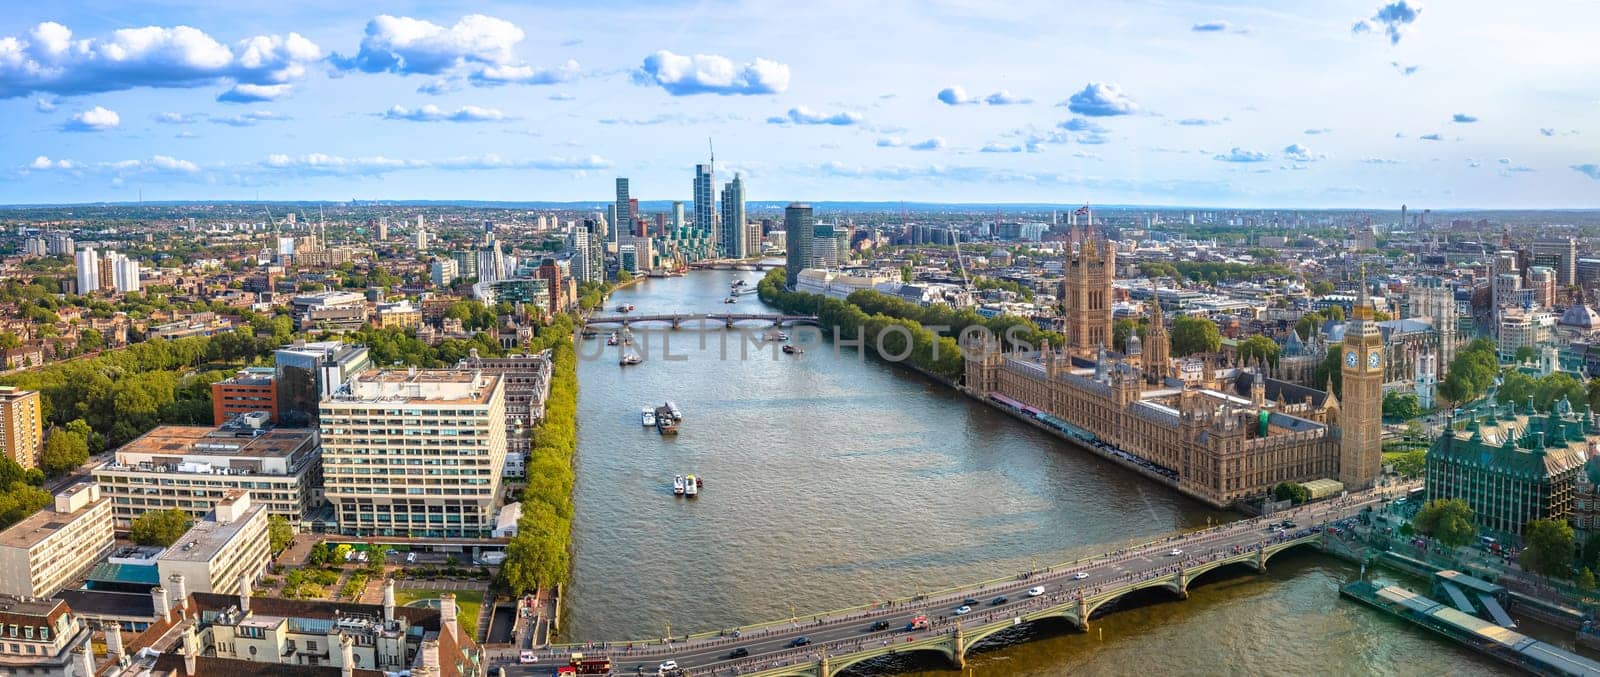 Westminster Big Ben and Thames riverfront panoramic view in London by xbrchx